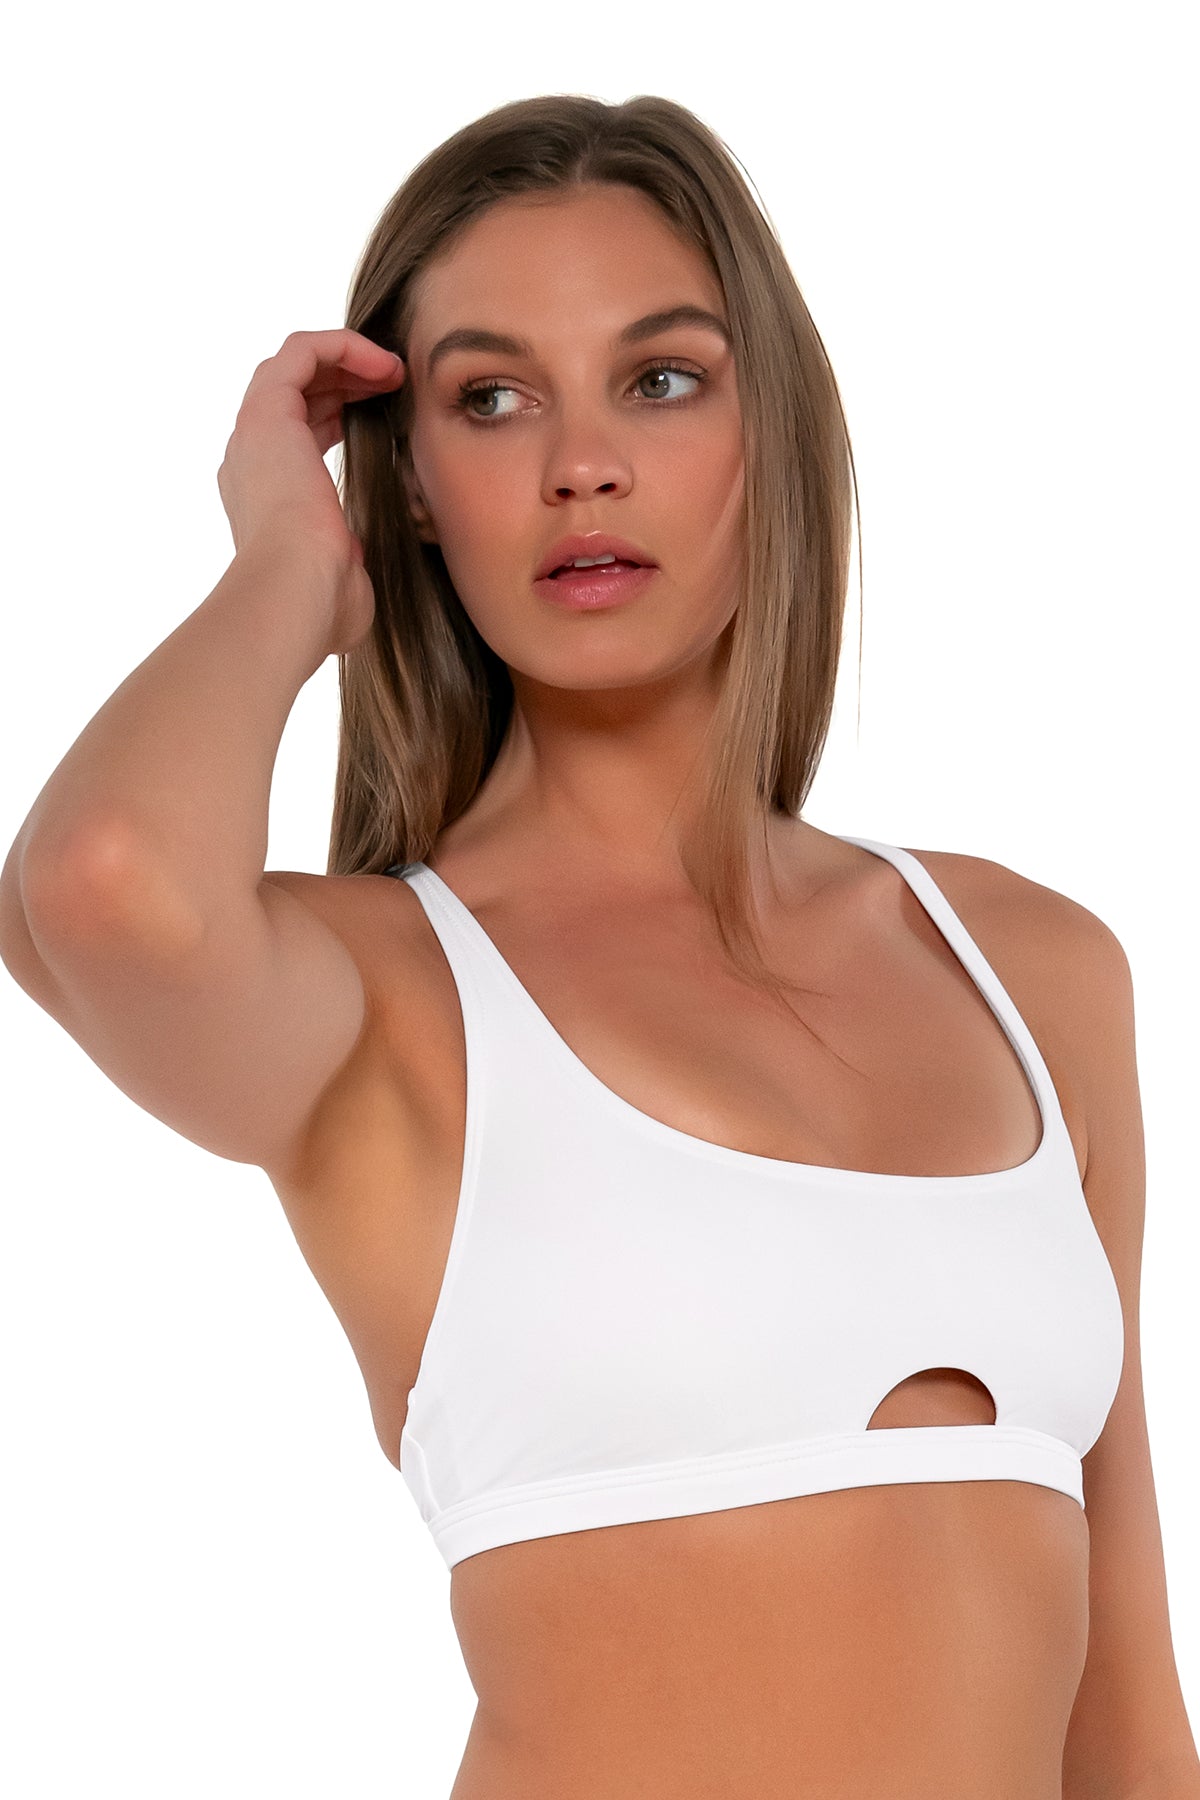 Side pose #1 of Daria wearing Sunsets White Lily Brandi Bralette Top